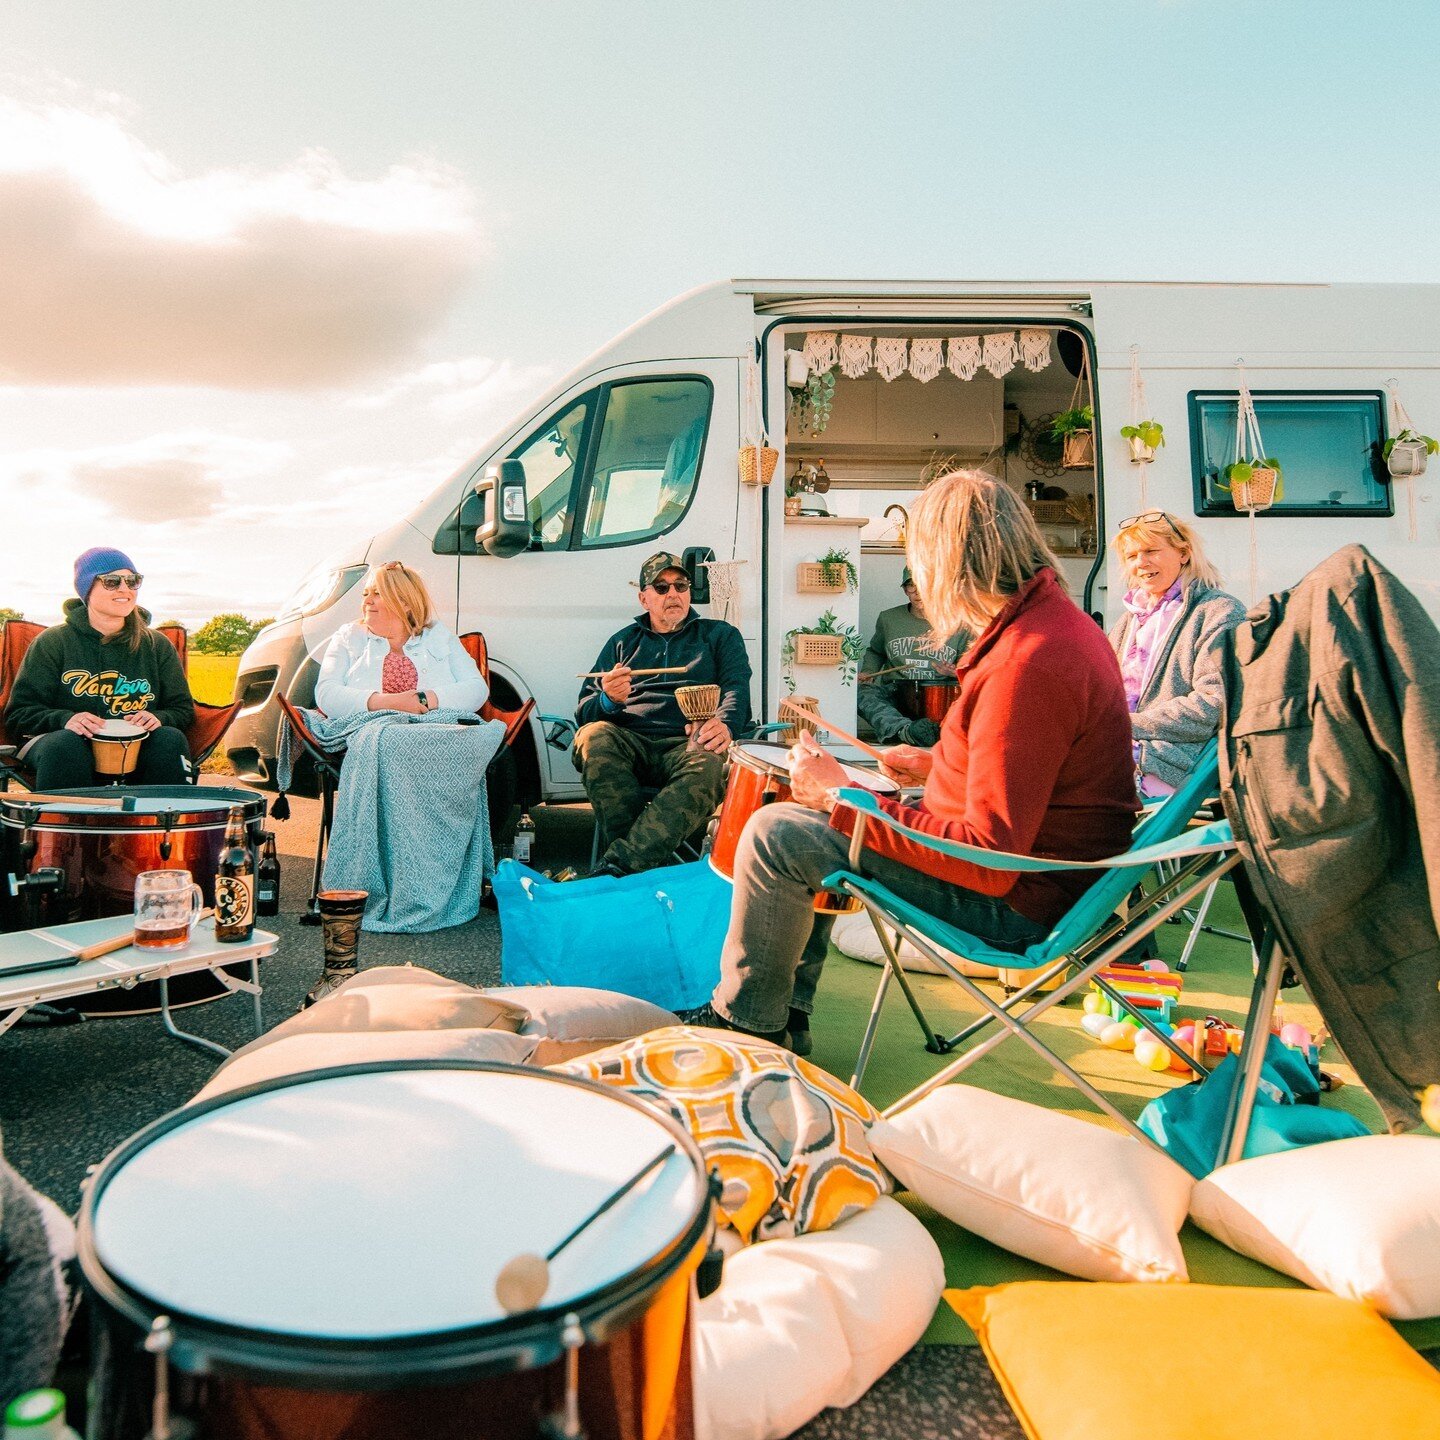 Who's hopping aboard your van for the ultimate road trip this year? Tag your road trip comrades below and let the good vibes flow! 🚐❤️ 

#vanlove24 #vanlovefest #vanlife #vanlovecommunity #vanfestival #elvingtonairfield #festivalvibes